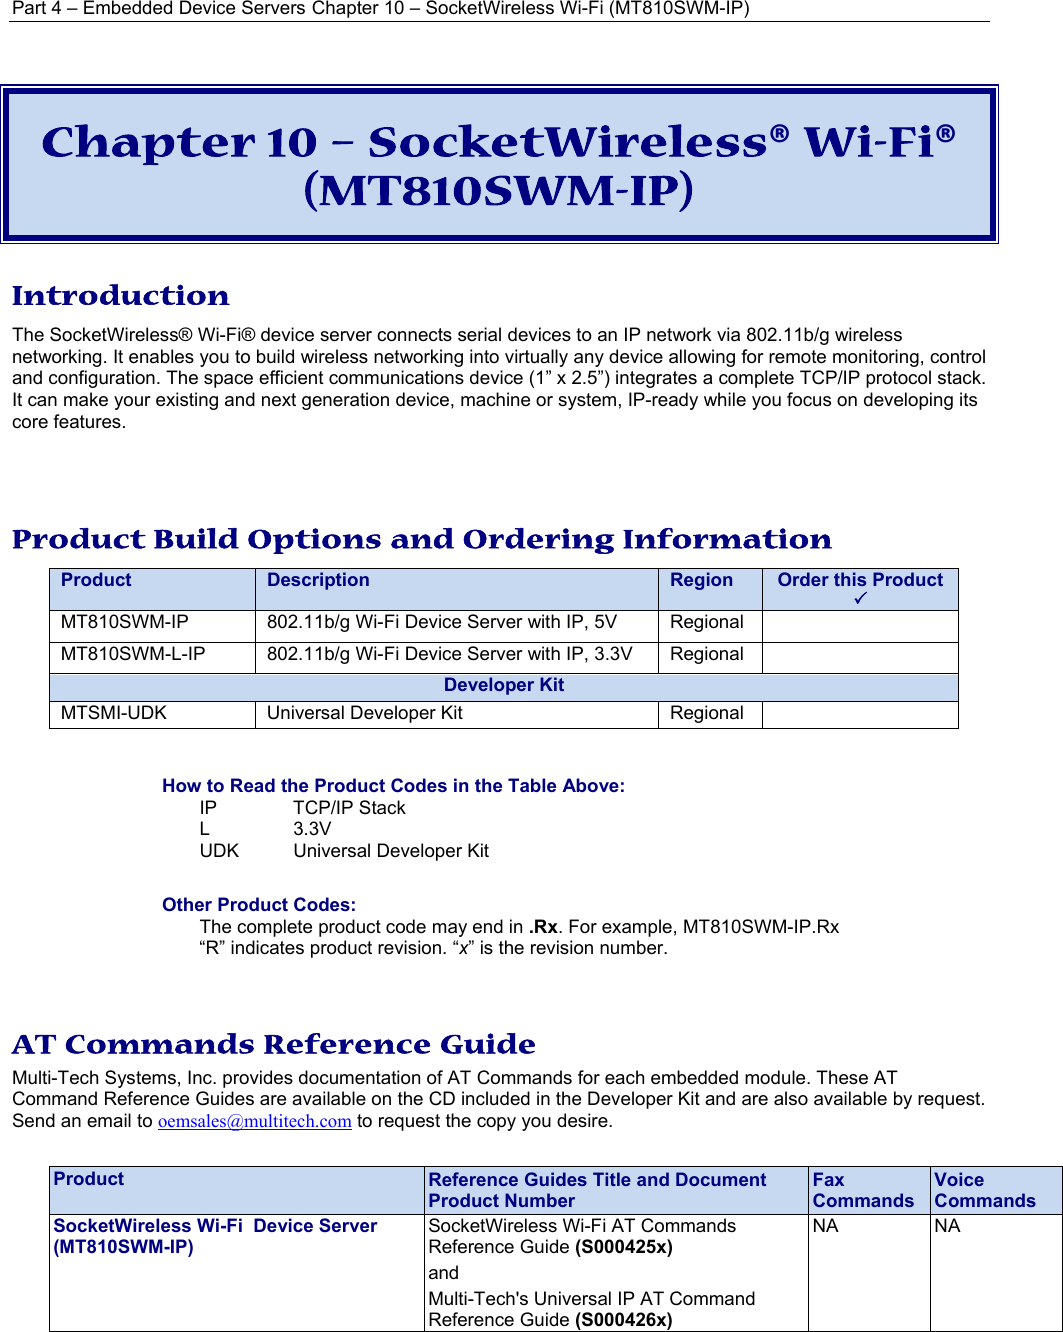 Part 4 – Embedded Device Servers Chapter 10 – SocketWireless Wi-Fi (MT810SWM-IP) Chapter 10 – SocketWireless® Wi-Fi® (MT810SWM-IP) Introduction The SocketWireless® Wi-Fi® device server connects serial devices to an IP network via 802.11b/g wireless networking. It enables you to build wireless networking into virtually any device allowing for remote monitoring, control and configuration. The space efficient communications device (1” x 2.5”) integrates a complete TCP/IP protocol stack. It can make your existing and next generation device, machine or system, IP-ready while you focus on developing its core features.   Product Build Options and Ordering Information   Product Description  Region Order this Product  3 MT810SWM-IP 802.11b/g Wi-Fi Device Server with IP, 5V  Regional  MT810SWM-L-IP 802.11b/g Wi-Fi Device Server with IP, 3.3V Regional  Developer KitMTSMI-UDK  Universal Developer Kit  Regional    How to Read the Product Codes in the Table Above: IP TCP/IP Stack L 3.3V UDK  Universal Developer Kit  Other Product Codes: The complete product code may end in .Rx. For example, MT810SWM-IP.Rx   “R” indicates product revision. “x” is the revision number.   AT Commands Reference Guide Multi-Tech Systems, Inc. provides documentation of AT Commands for each embedded module. These AT Command Reference Guides are available on the CD included in the Developer Kit and are also available by request. Send an email to oemsales@multitech.com to request the copy you desire.   Product  Reference Guides Title and Document Product Number Fax Commands Voice Commands SocketWireless Wi-Fi  Device Server (MT810SWM-IP) SocketWireless Wi-Fi AT Commands Reference Guide (S000425x)  and Multi-Tech&apos;s Universal IP AT Command Reference Guide (S000426x) NA NA  